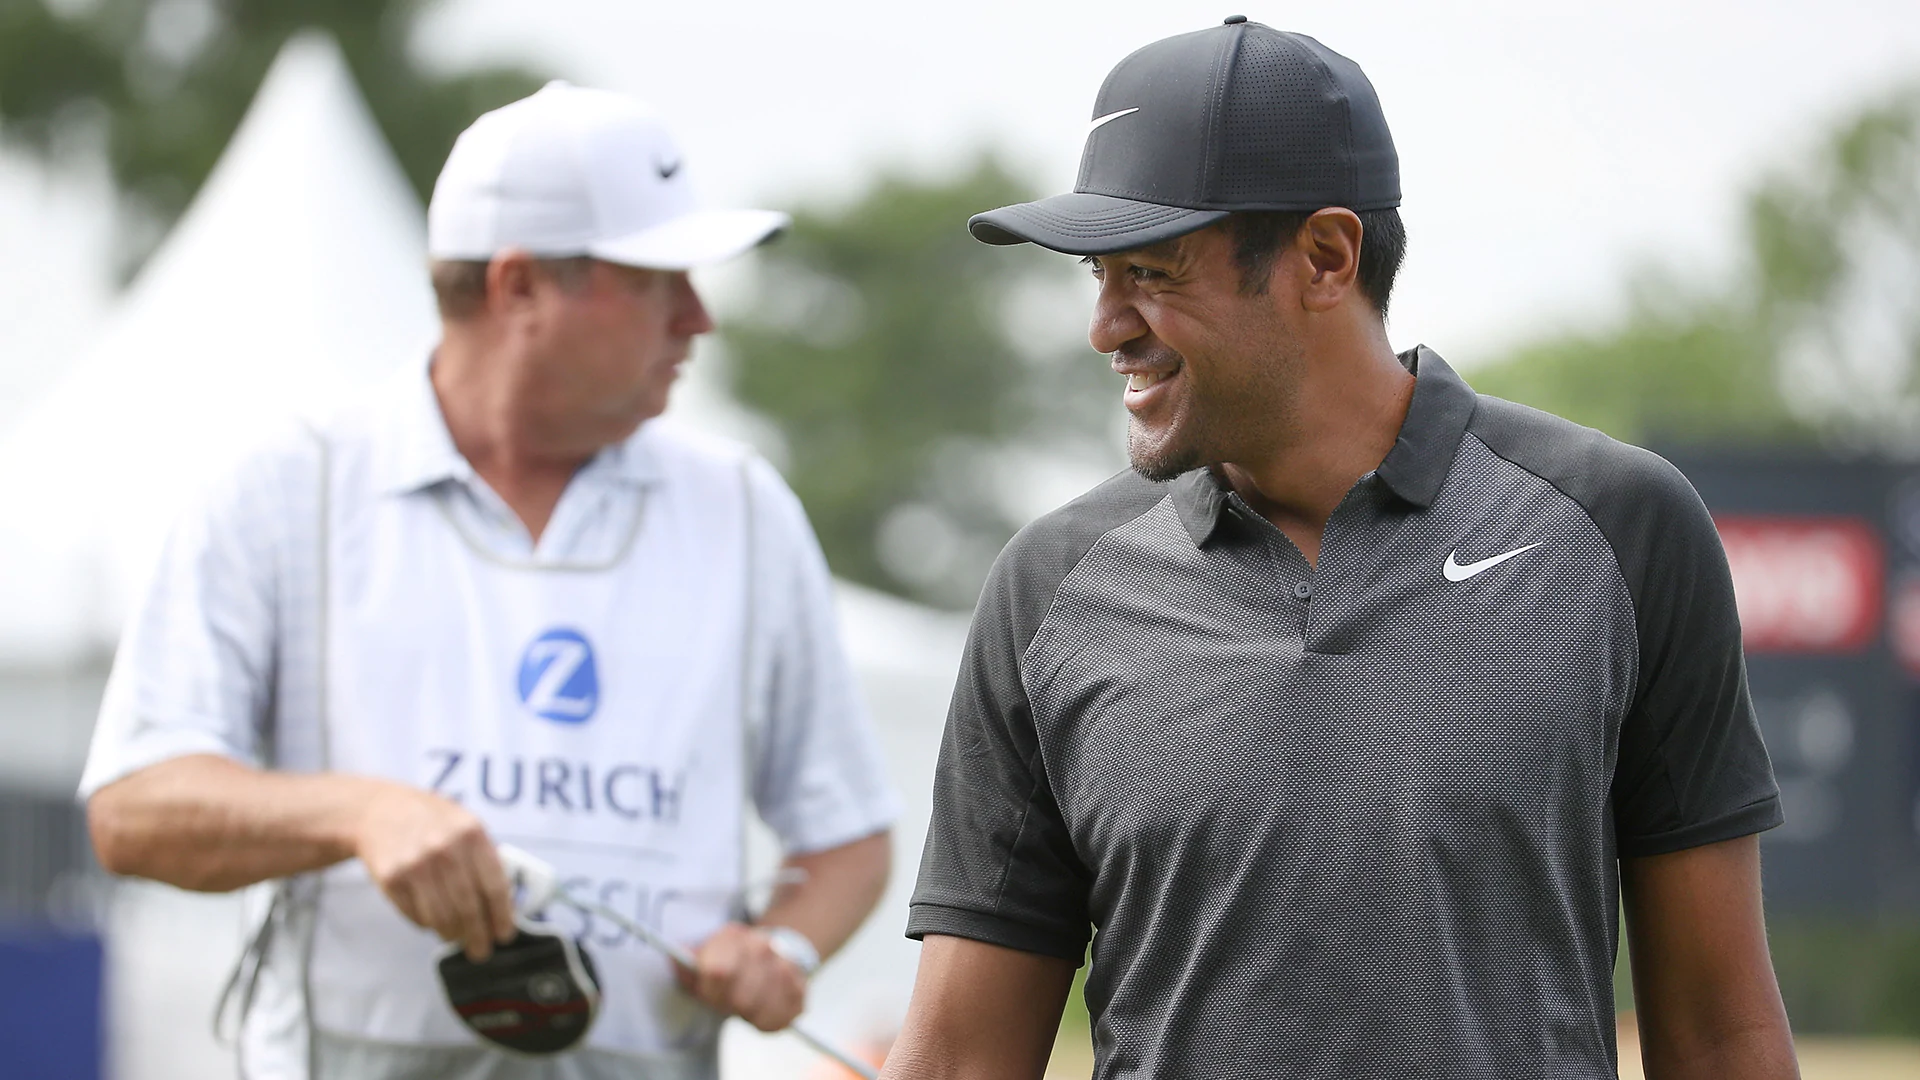 Finau lifts team to opening 62 on improving ankle